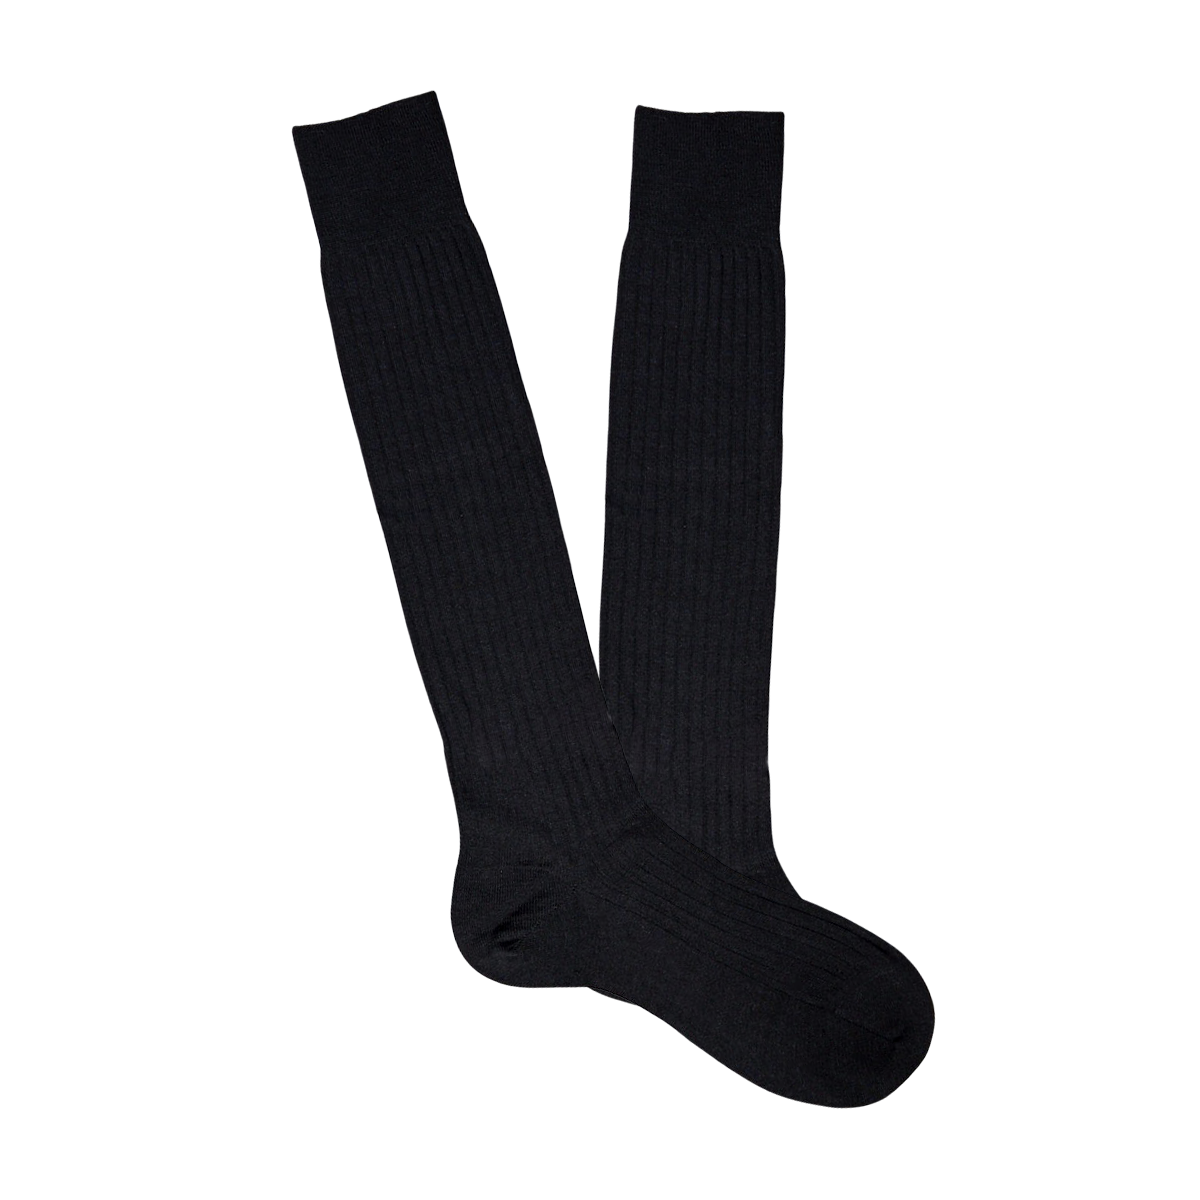 A pair of Black Merino Wool Ribbed Knee Socks by Pantherella on a white background.